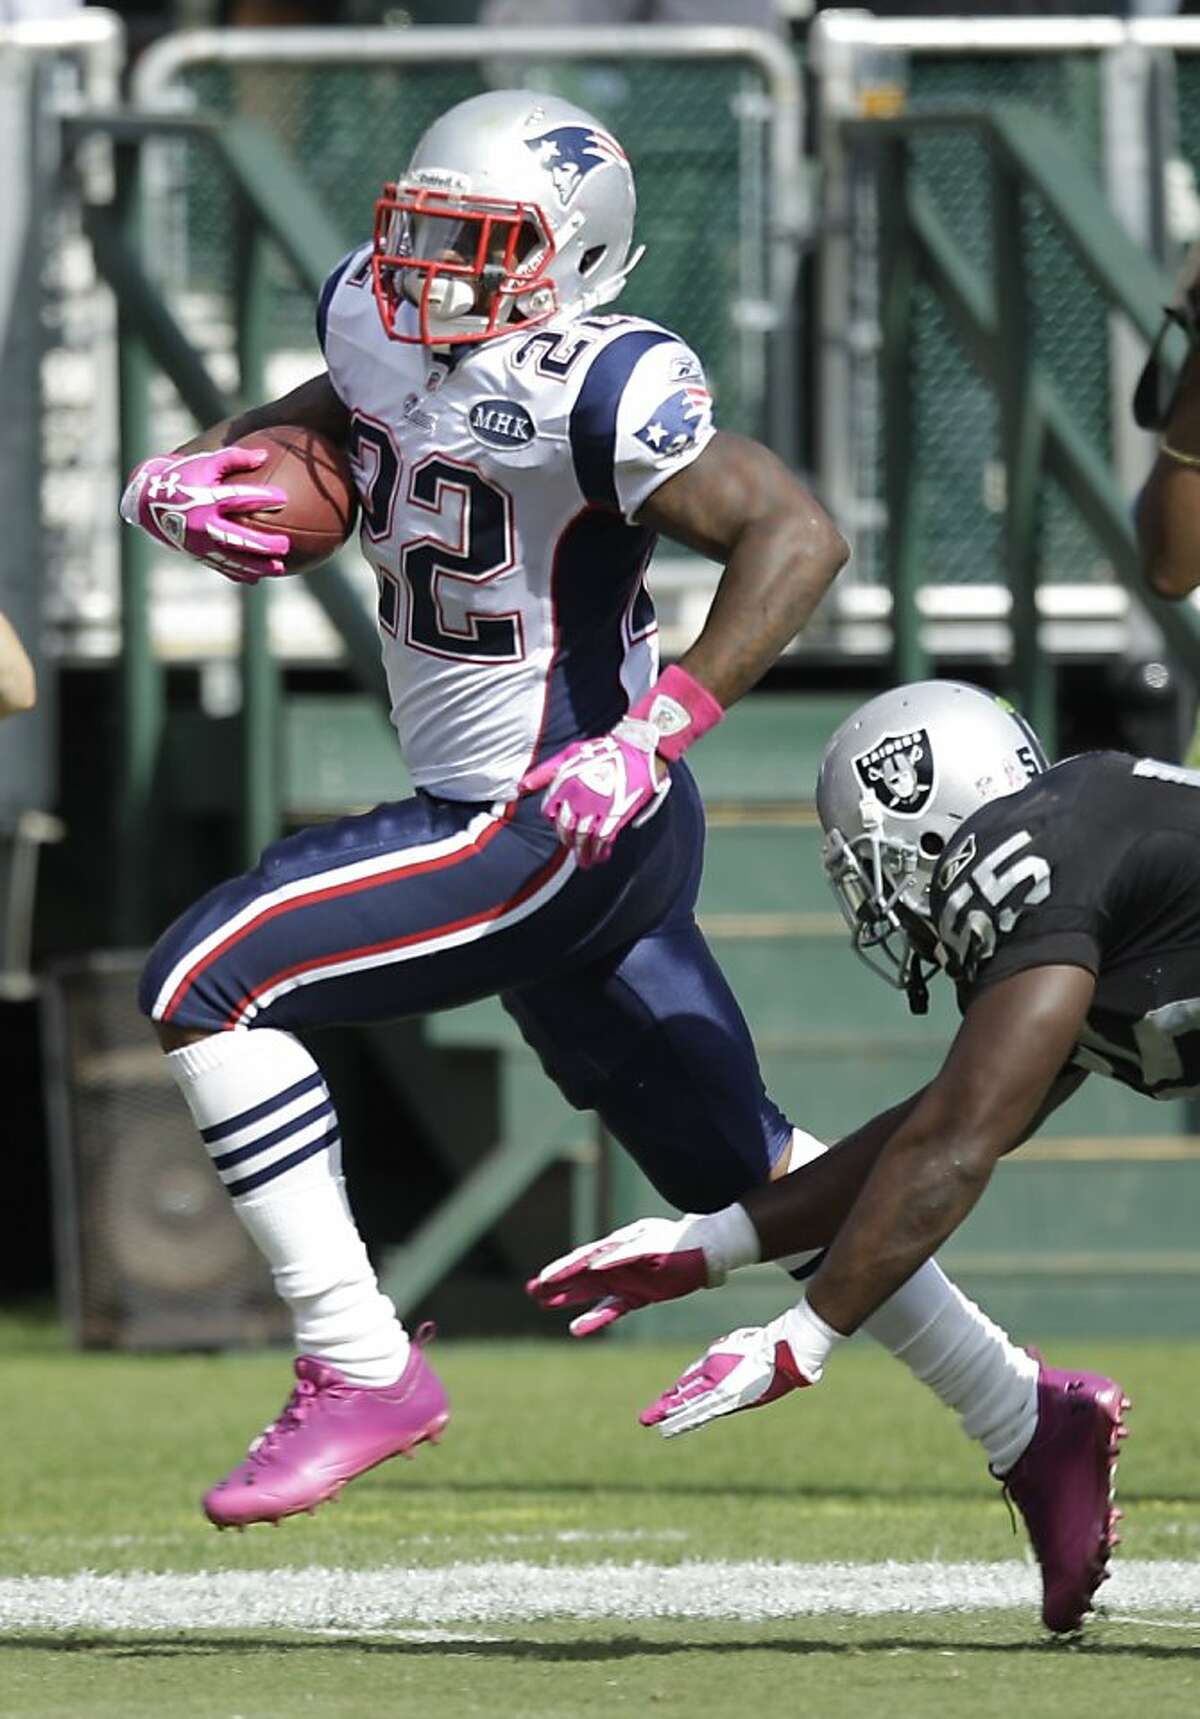 New England Patriots running back Stevan Ridley, left, breaks away from Oakland Raiders linebacker Rolando McClain for a 33-yard touchdown run during the third quarter of their NFL football game in Oakland, Calif., Sunday, Oct. 2, 2011. (AP Photo/Ben Margot)